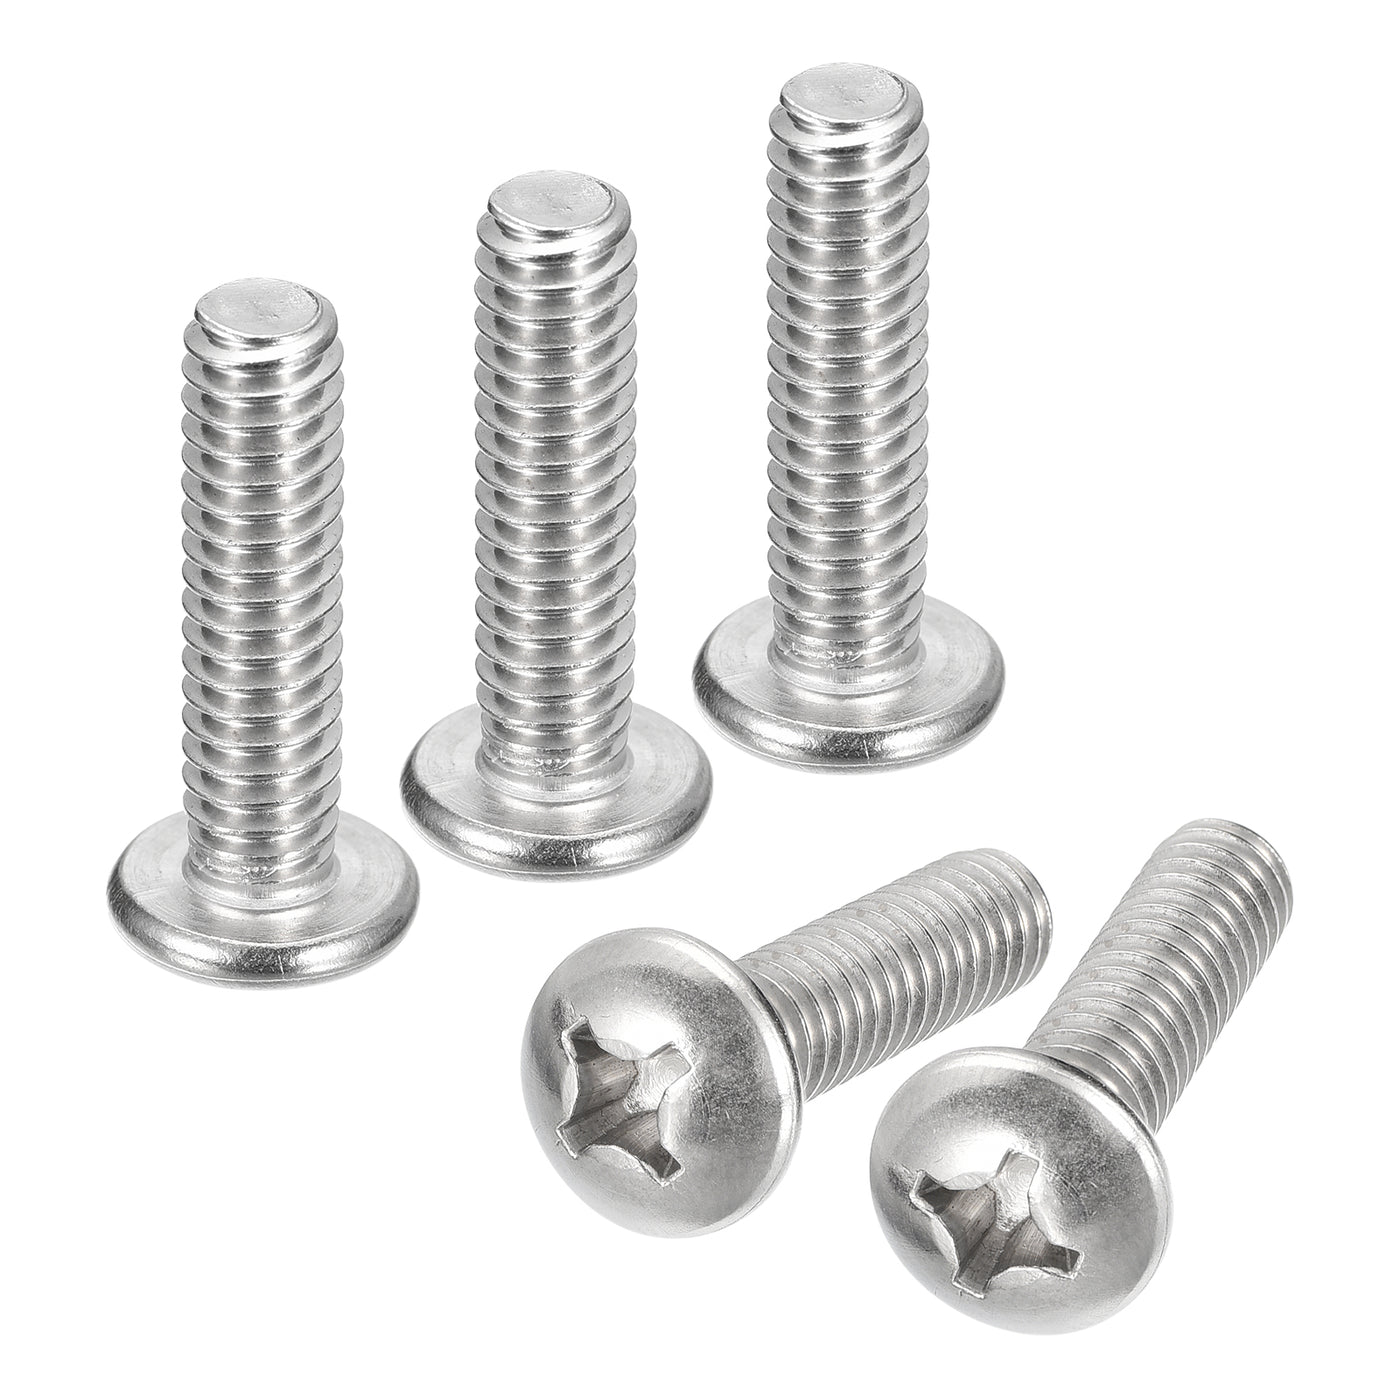 uxcell Uxcell 1/4-20x1" Pan Head Machine Screws, Stainless Steel 18-8 Screw, Pack of 50